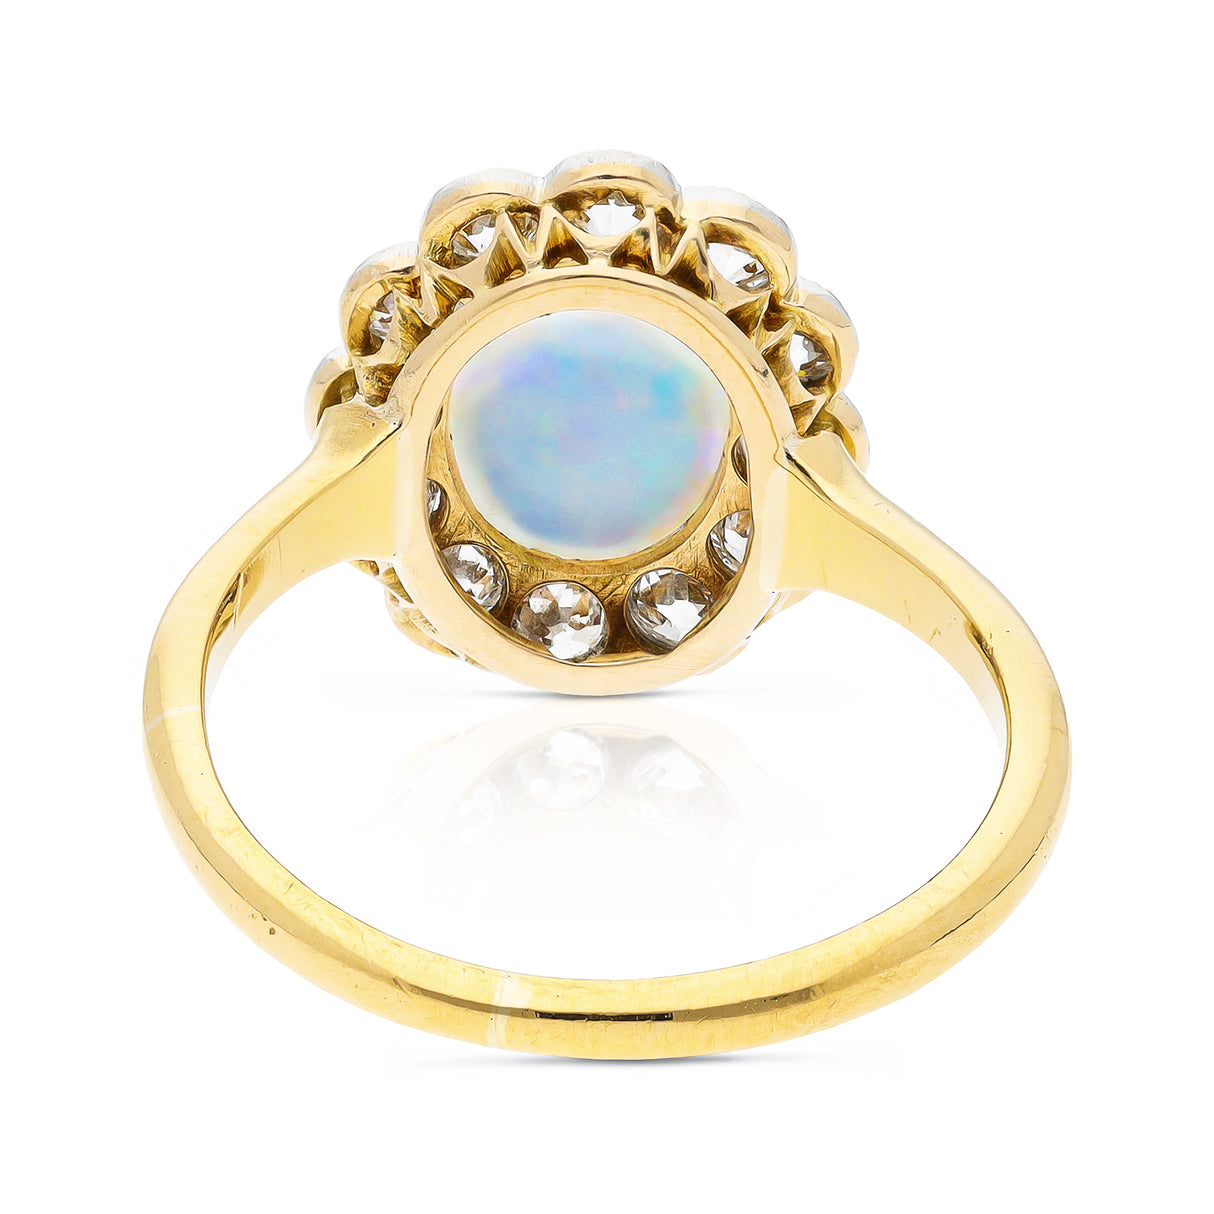 Opal and diamond cluster ring, rear view.